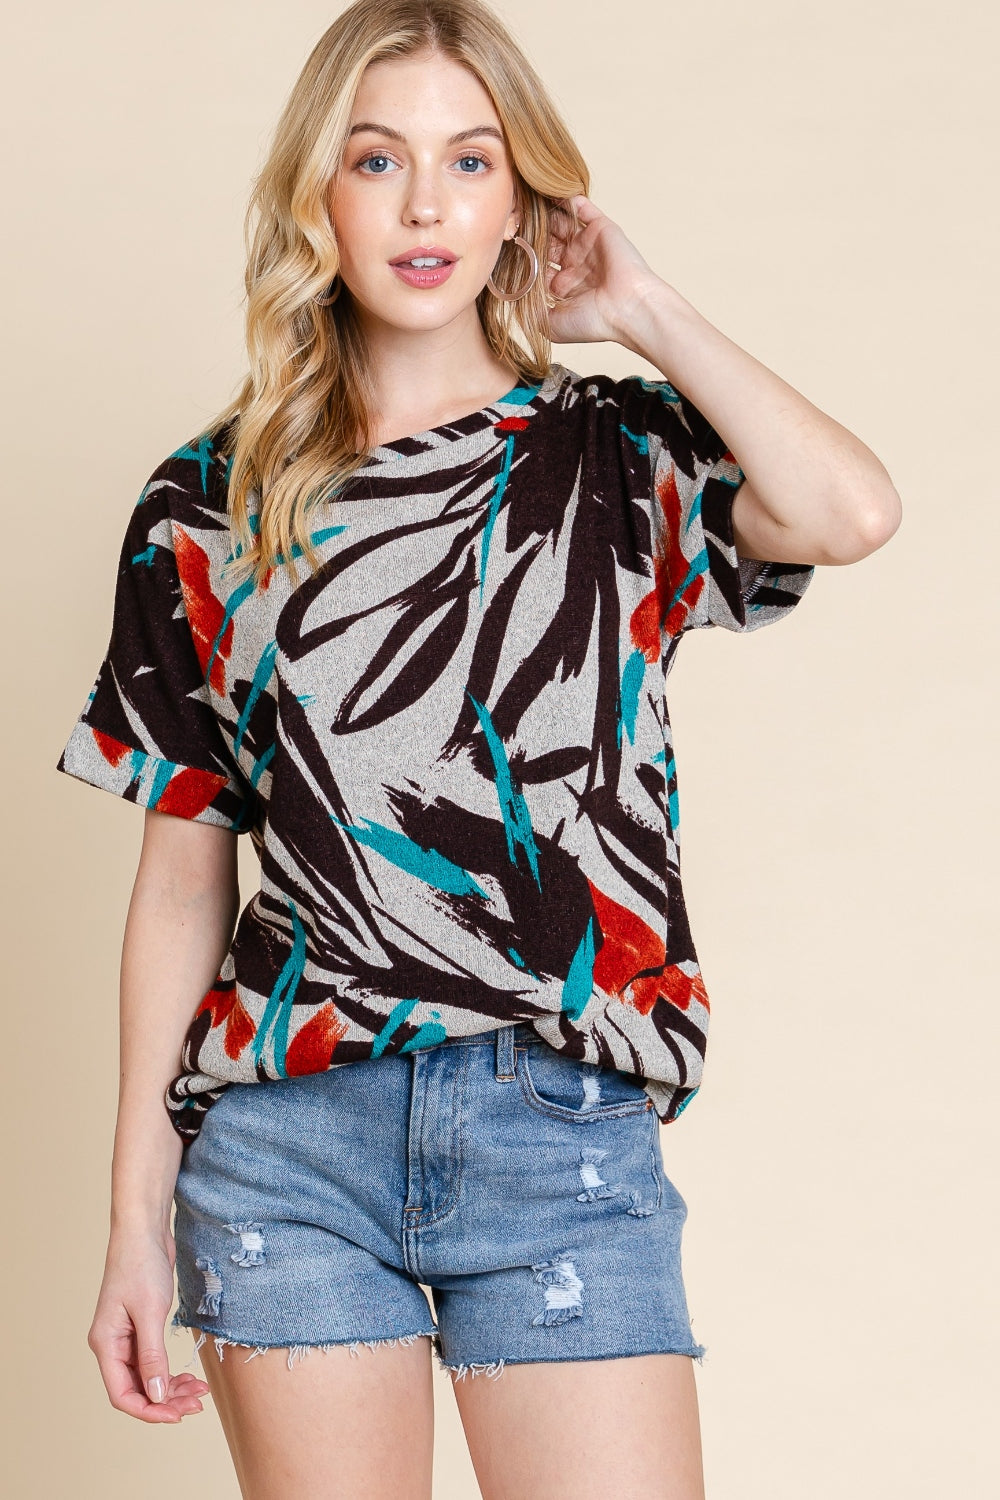 BOMBOM Printed Round Neck Short Sleeve T-Shirt-Short Sleeve Tops-Inspired by Justeen-Women's Clothing Boutique in Chicago, Illinois